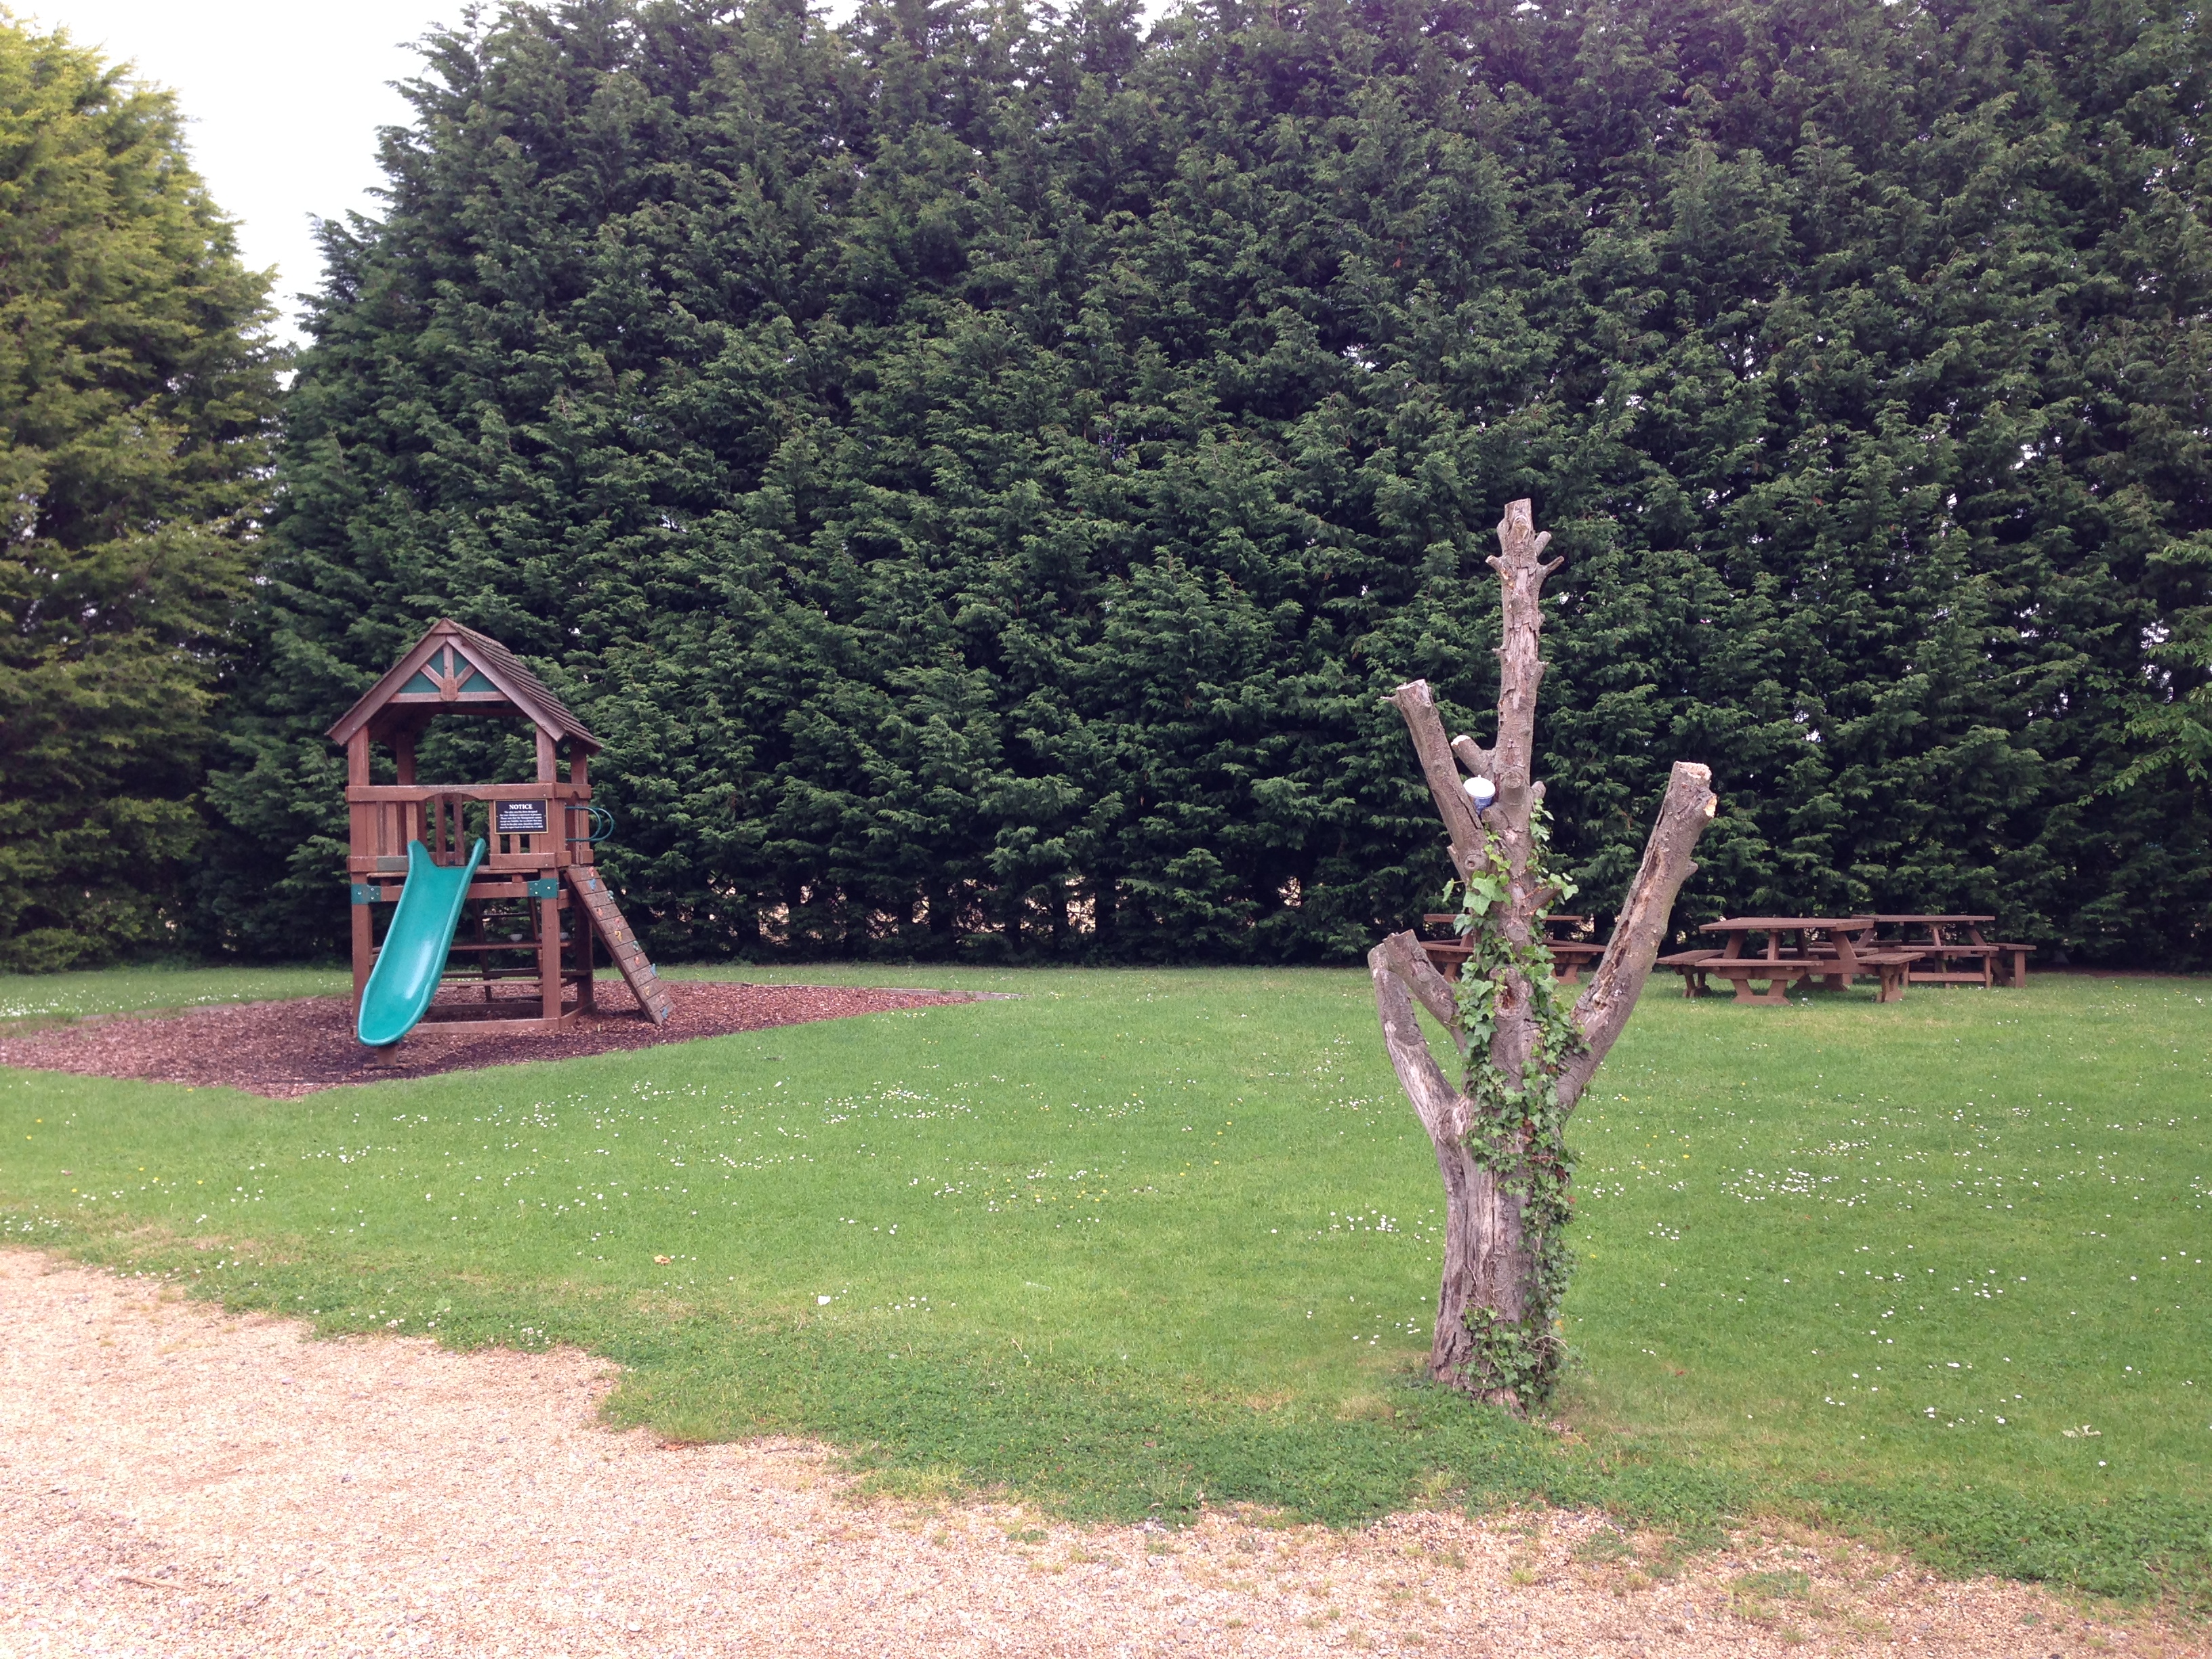 The Plough Coton - Playground and outdoor seating